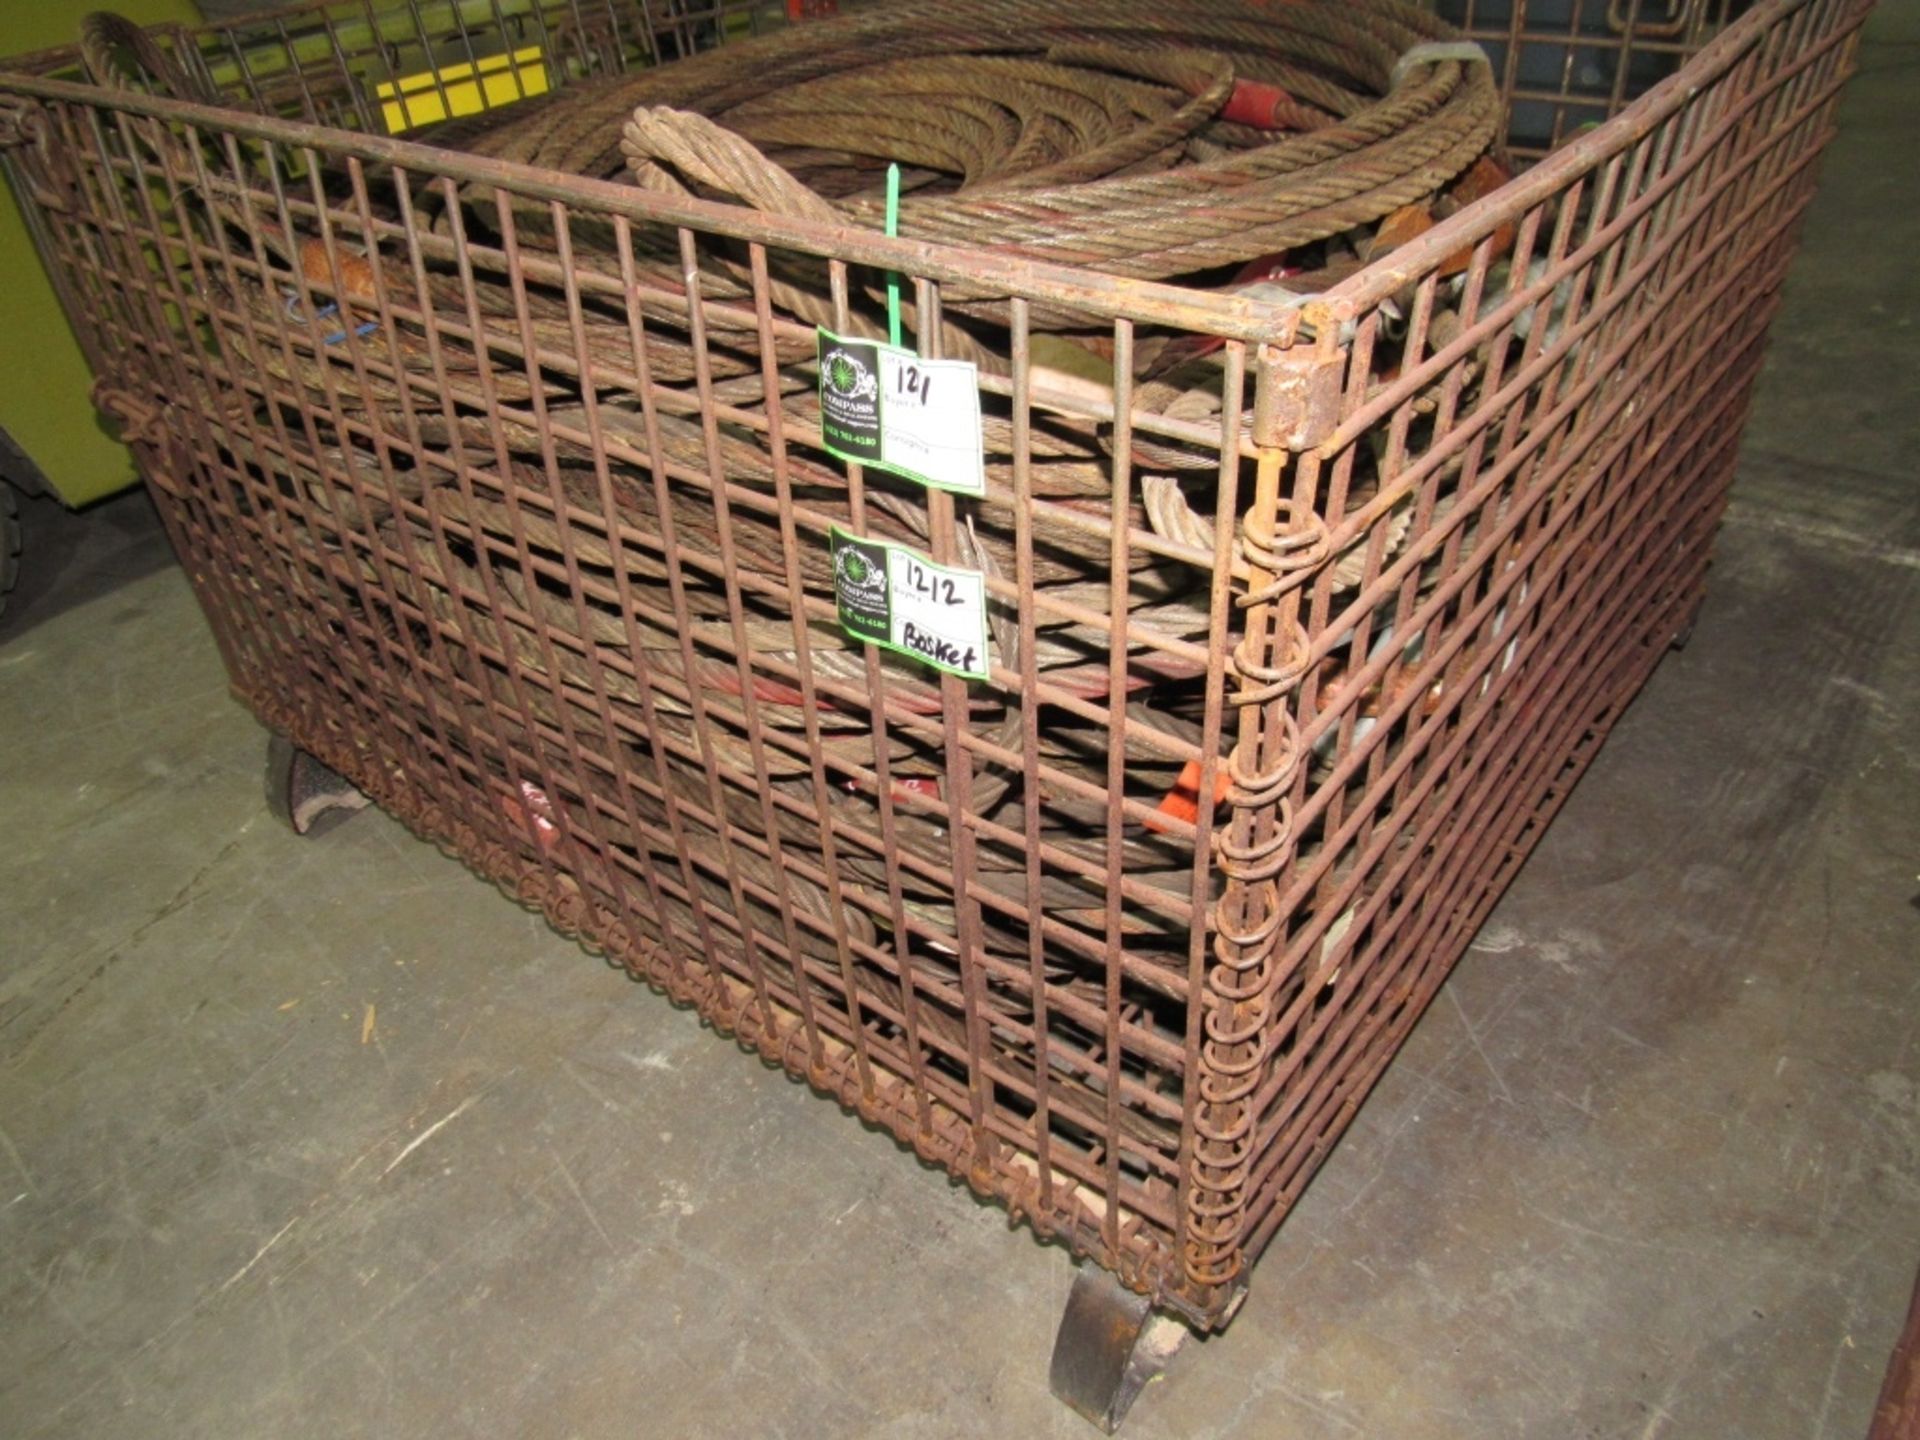 Warehouse Basket- MFR - Unknown 48" x 40" x 31" **Contents SOLD Separately in Lot #1211**